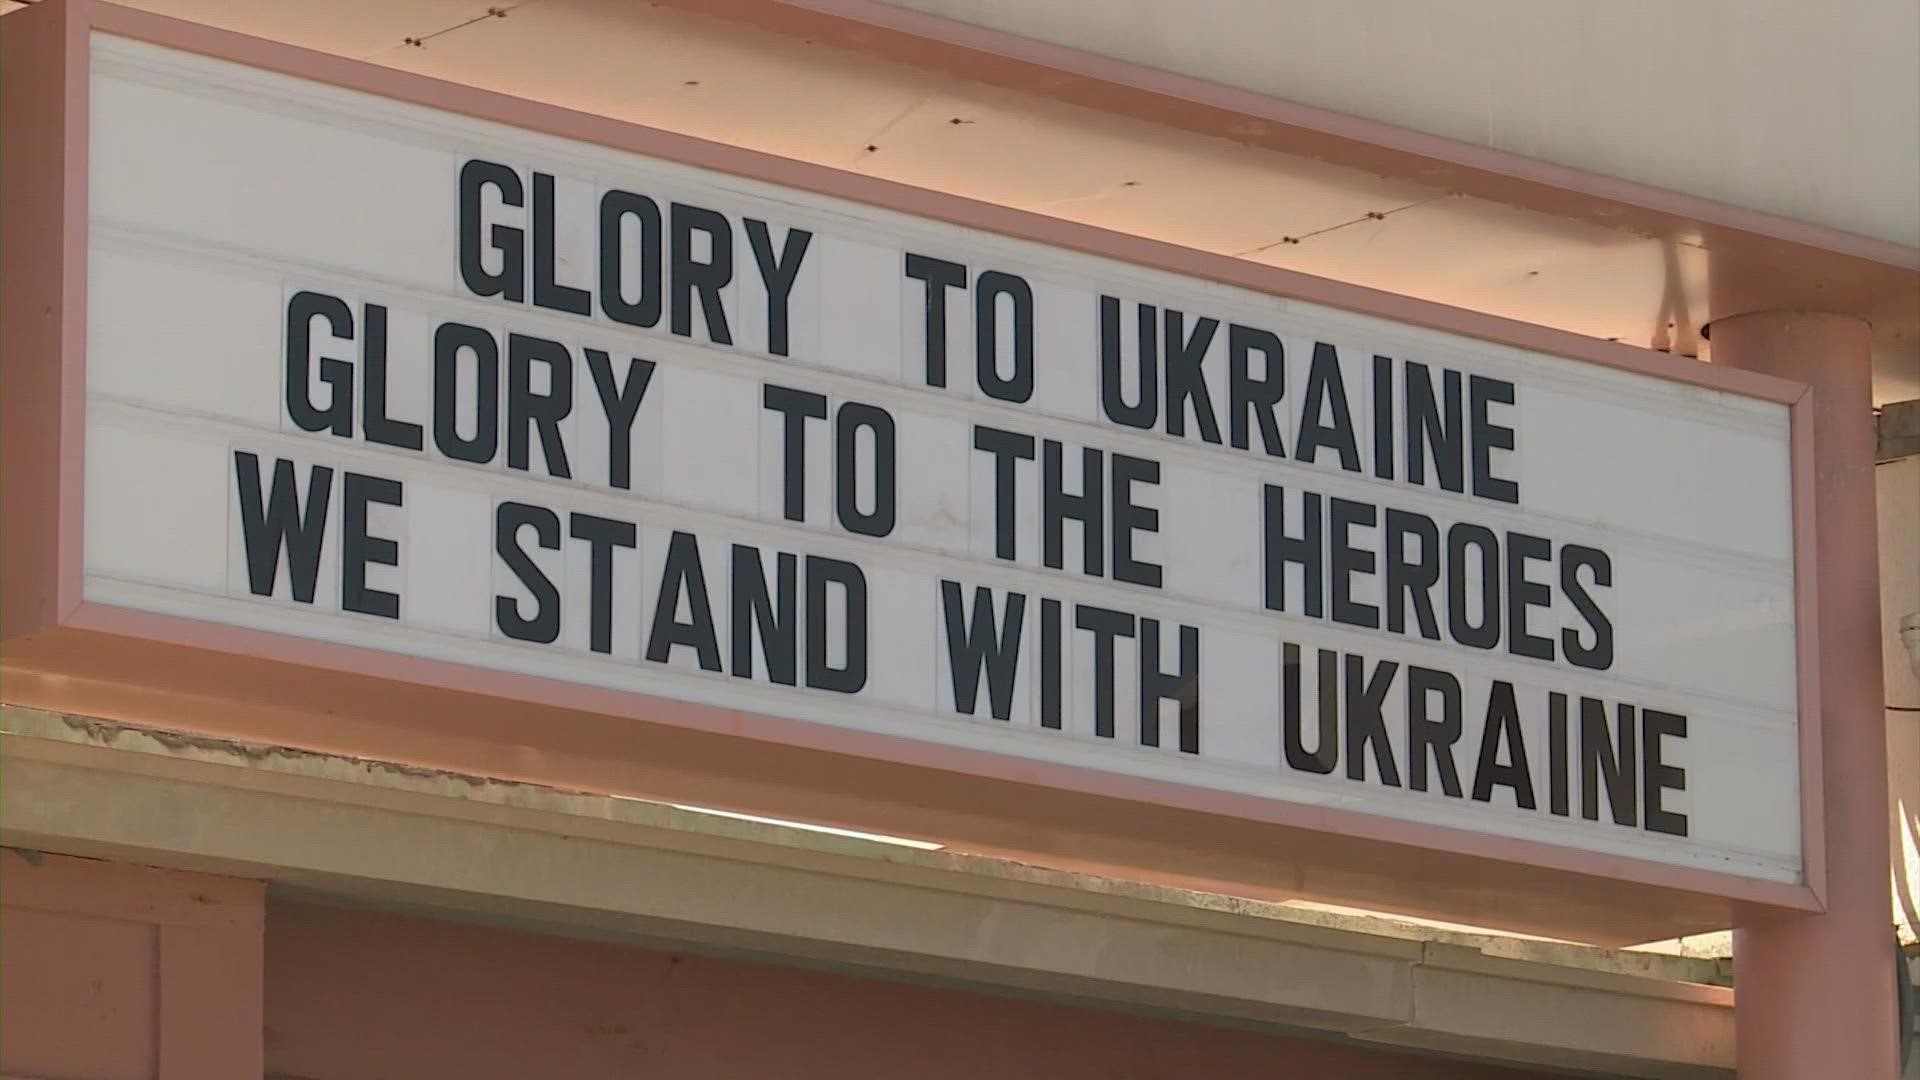 Owner Nick Gaido's wife, Kateryna, was born in Ukraine. Her family is still there. They are donating a portion of each meal sold to help the Ukrainians.